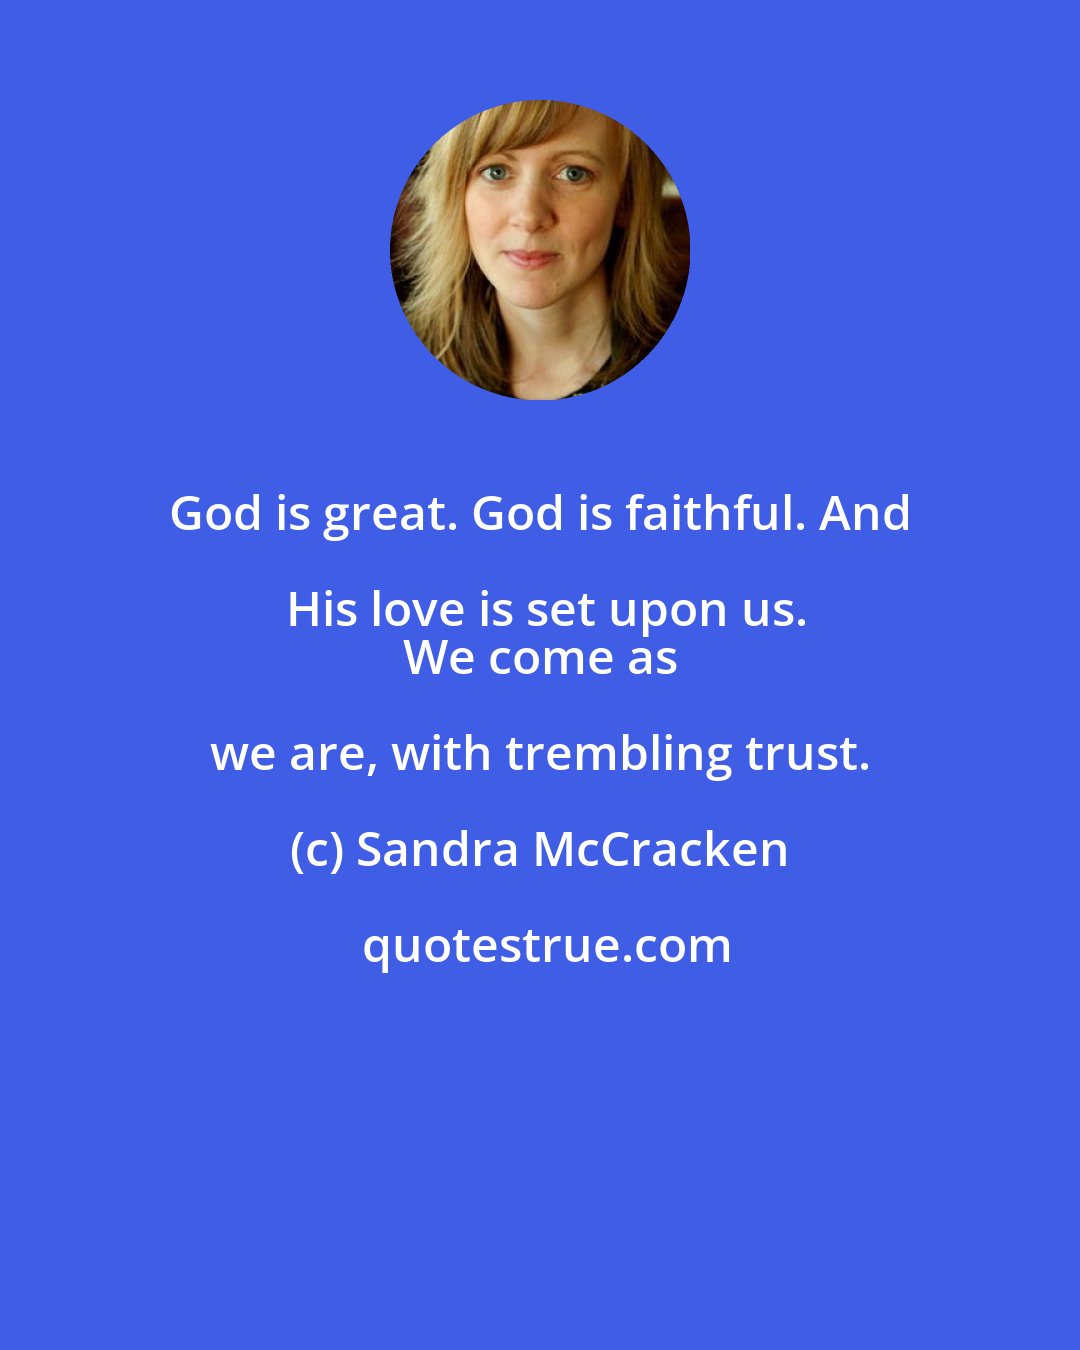 Sandra McCracken: God is great. God is faithful. And His love is set upon us.
 We come as we are, with trembling trust.